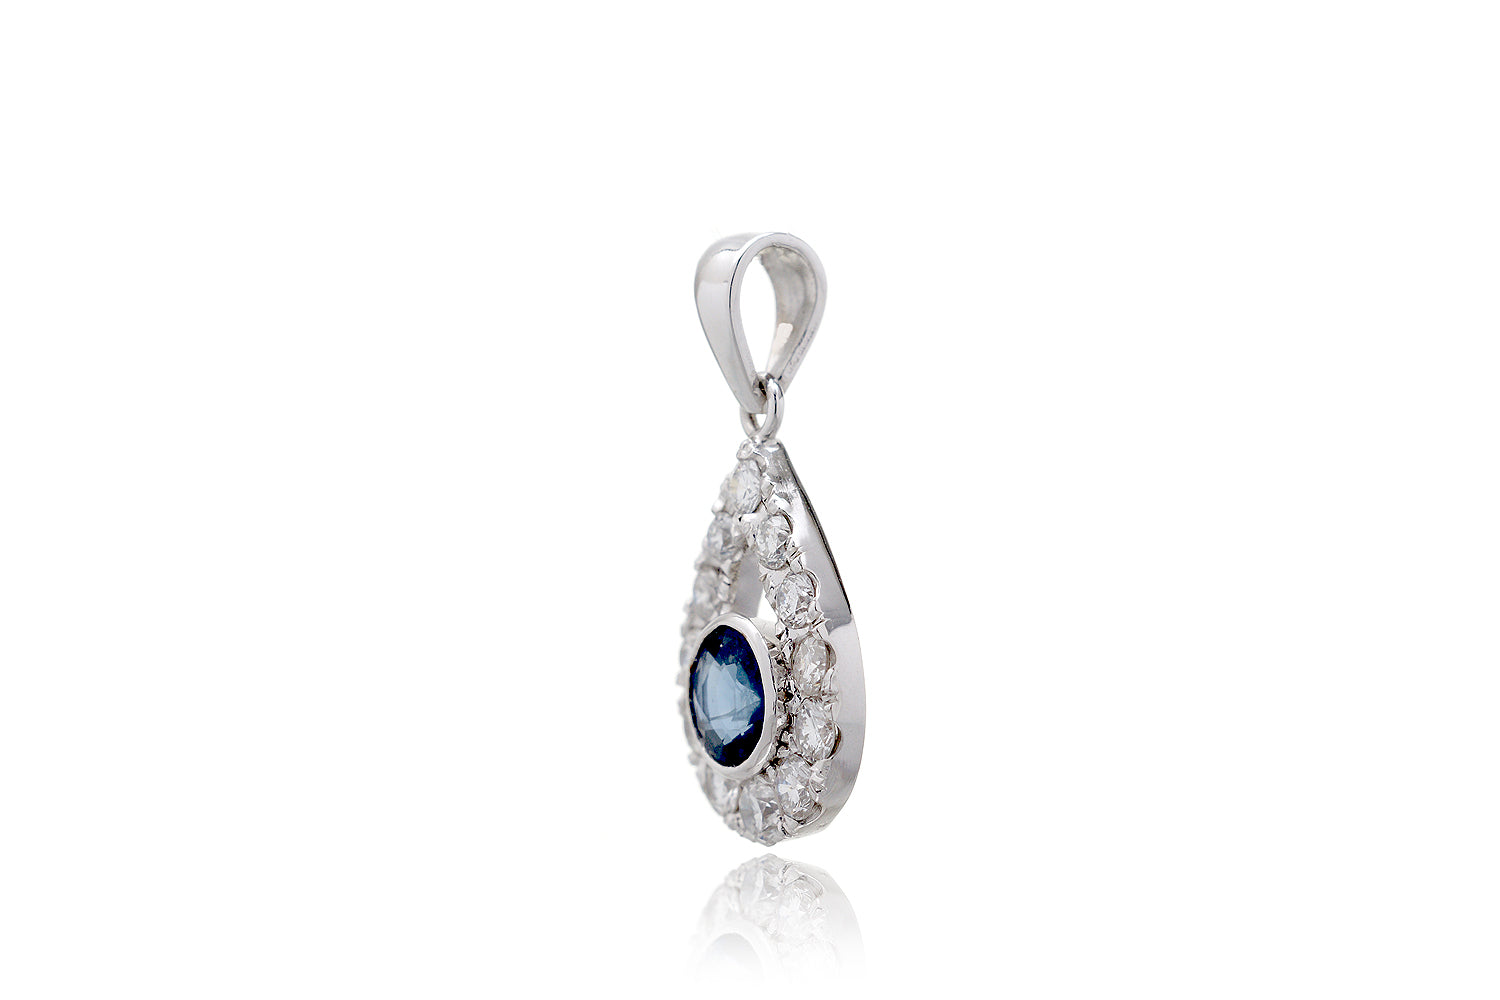 The Round Sapphire With Teardrop Halo Pendant